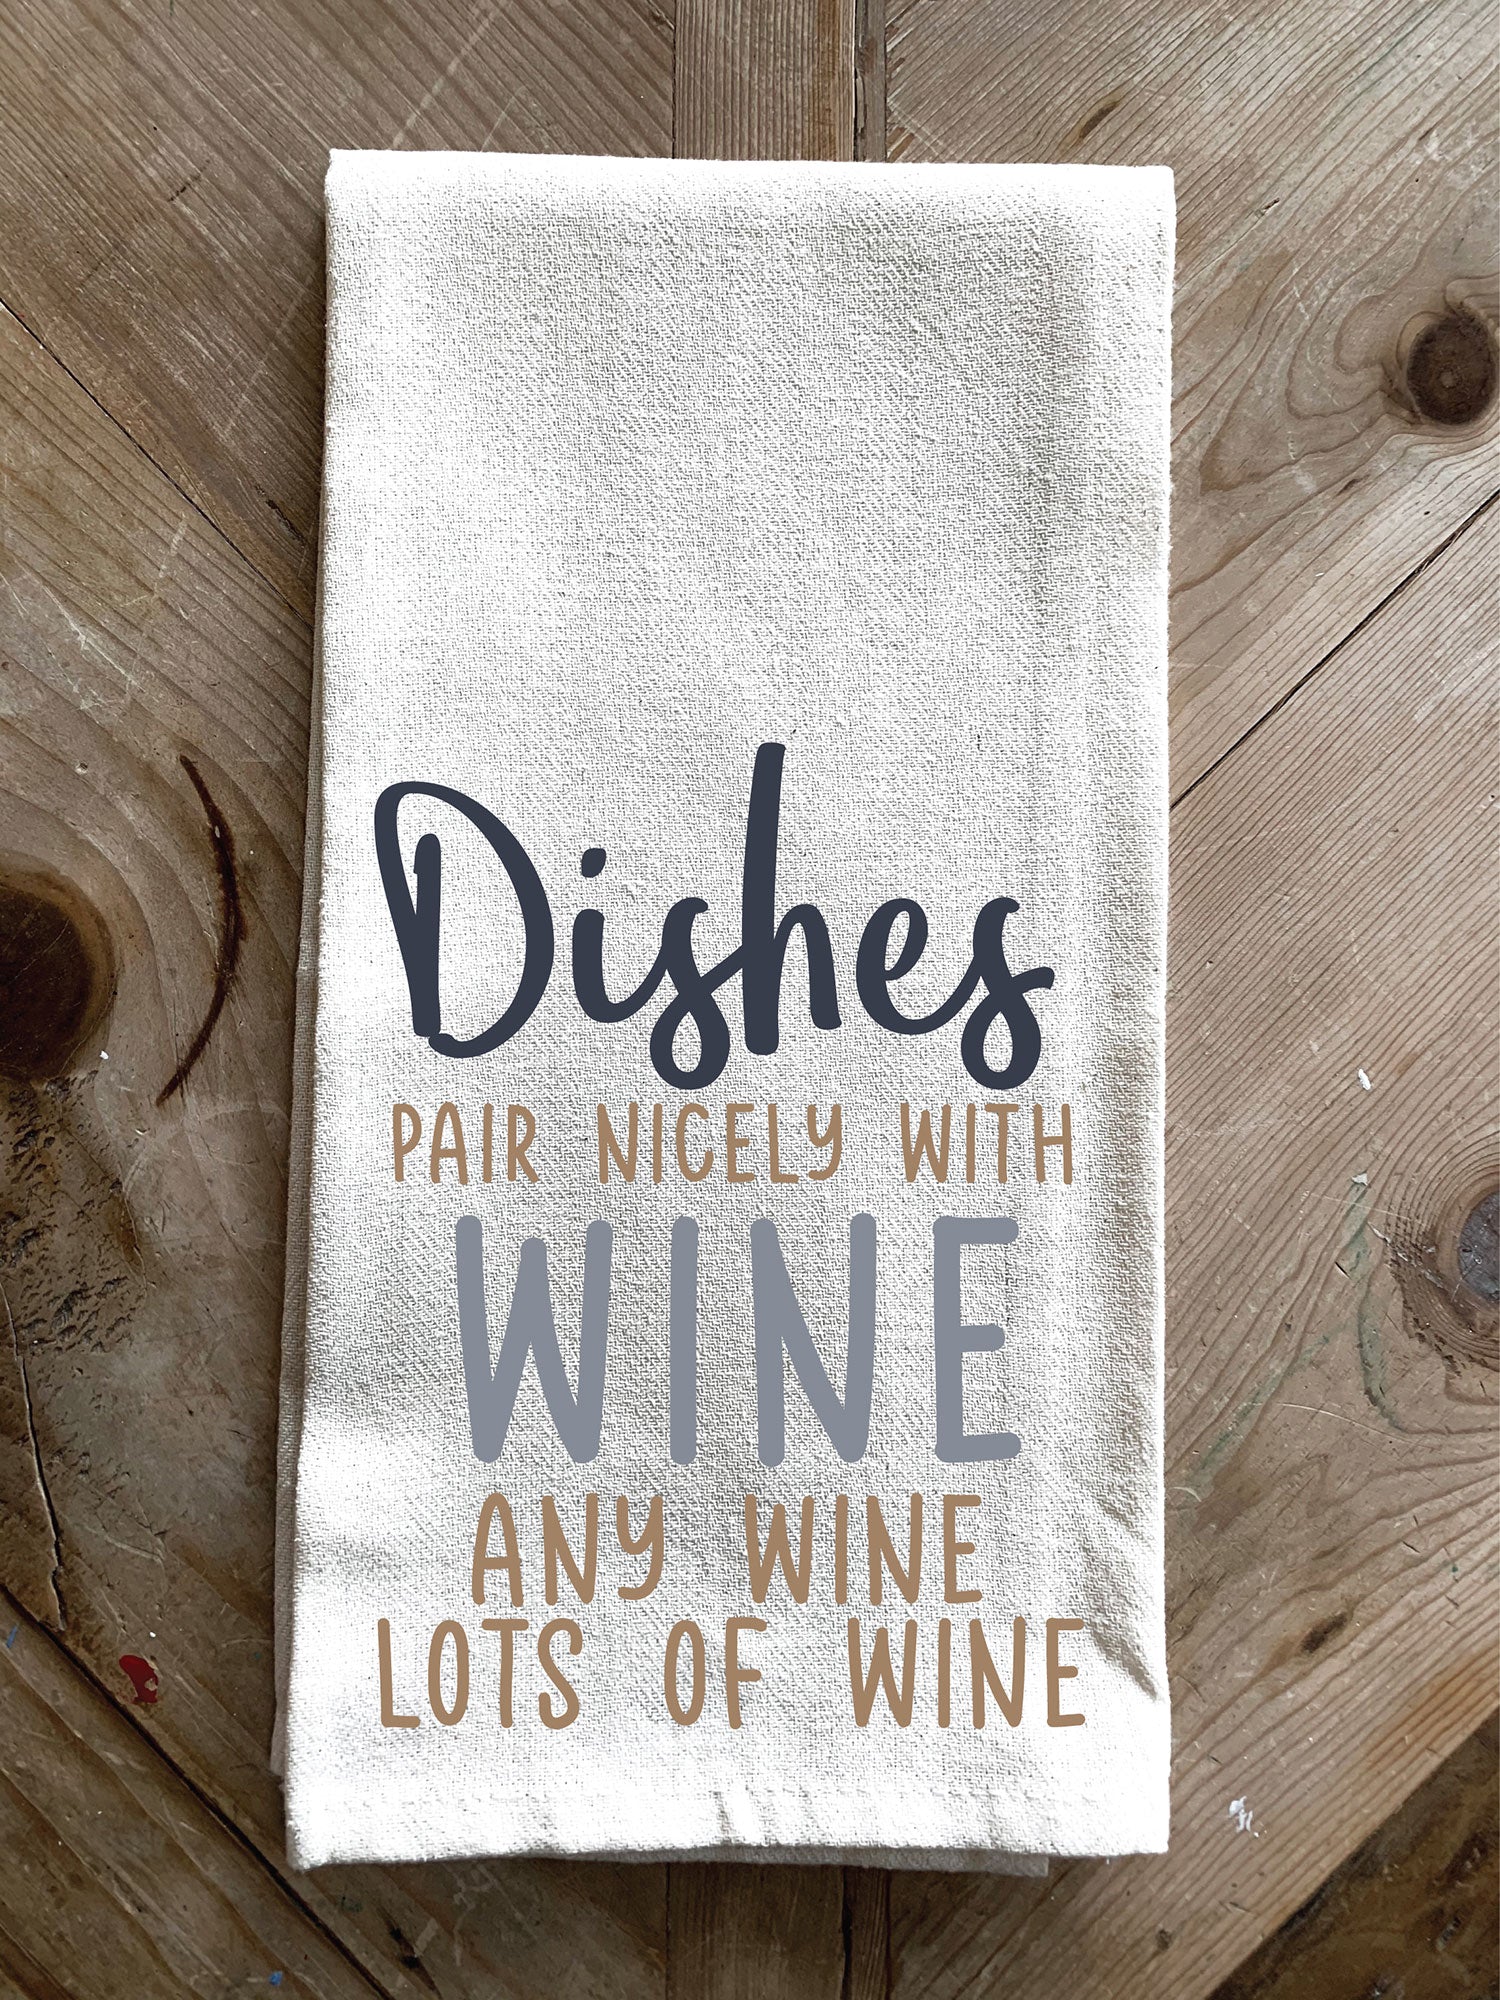 Dishes pair nicely with wine... any wine... Lots of wine / Kitchen Towel